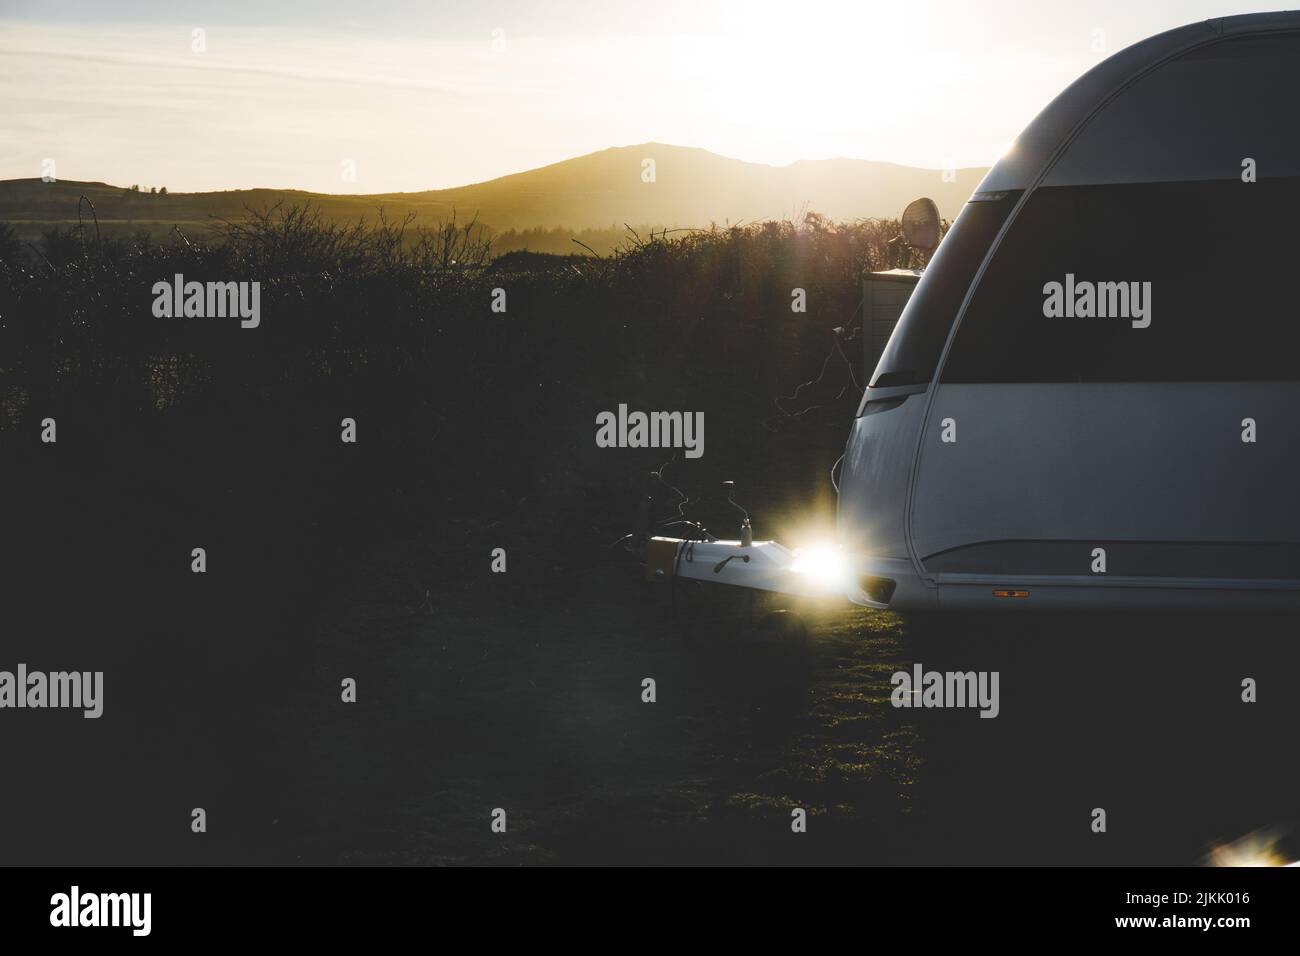 The side view of a driverless train in a countryside Stock Photo